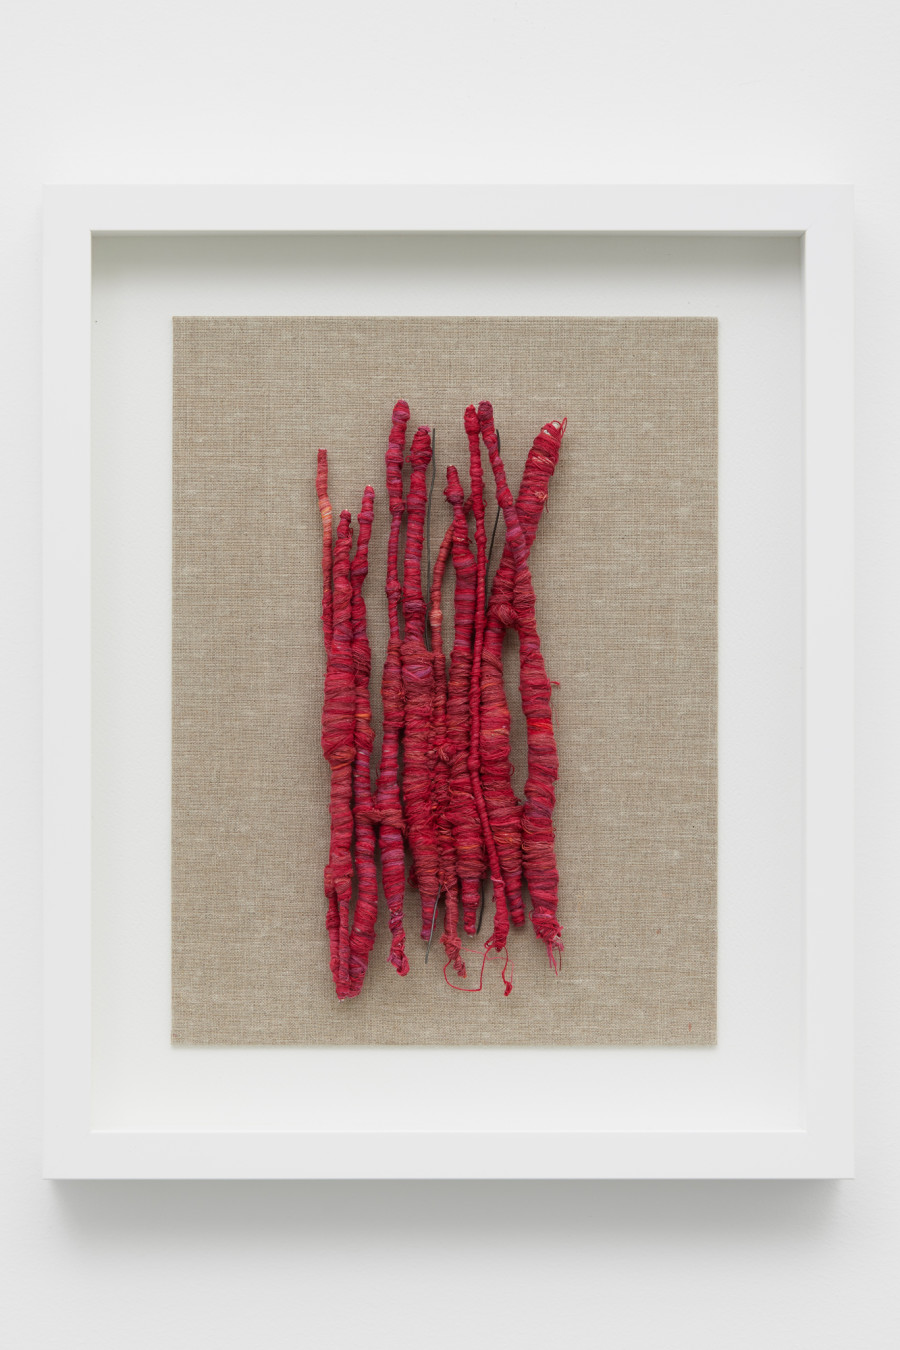 Soojin Kang, Untitled (mould), 2022, Silk, jute, cotton, linen and wire, framed, 54 x 44 cm (frame). Courtesy: the artist and Ben Hunter, London. Photo: Hannes Heinzer